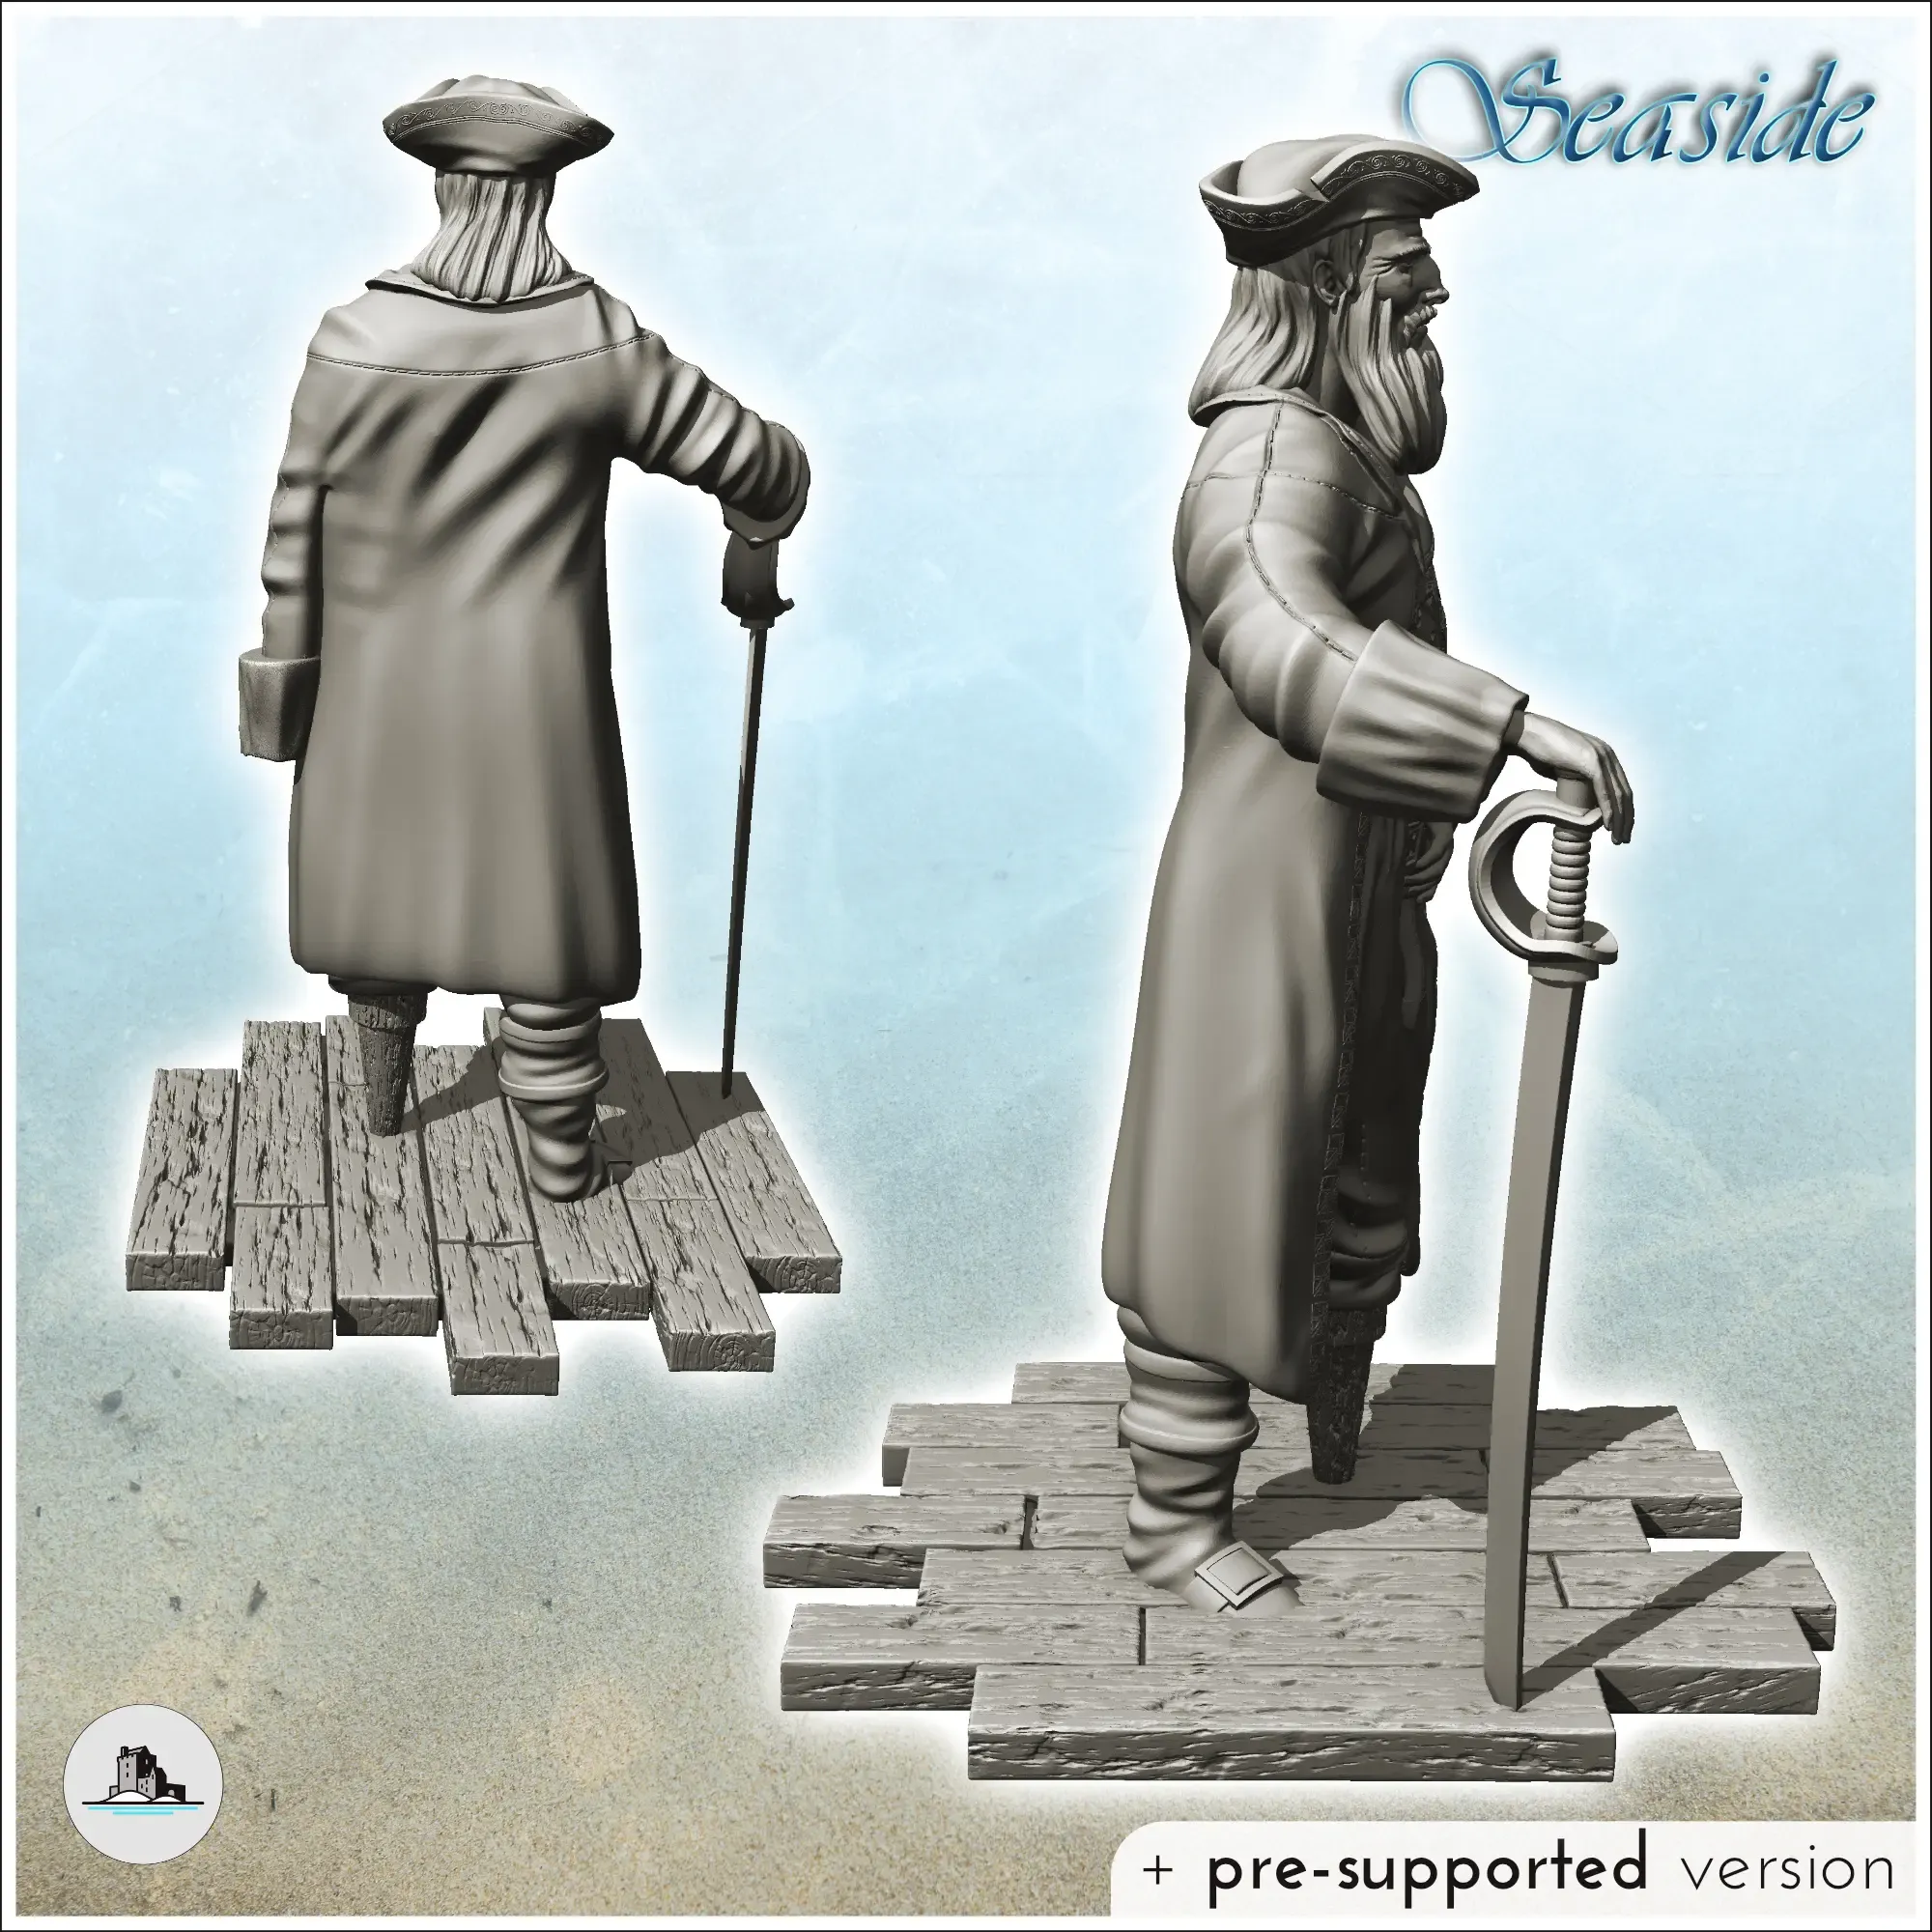 Bearded and one-armed pirate captain with wooden leg - mini